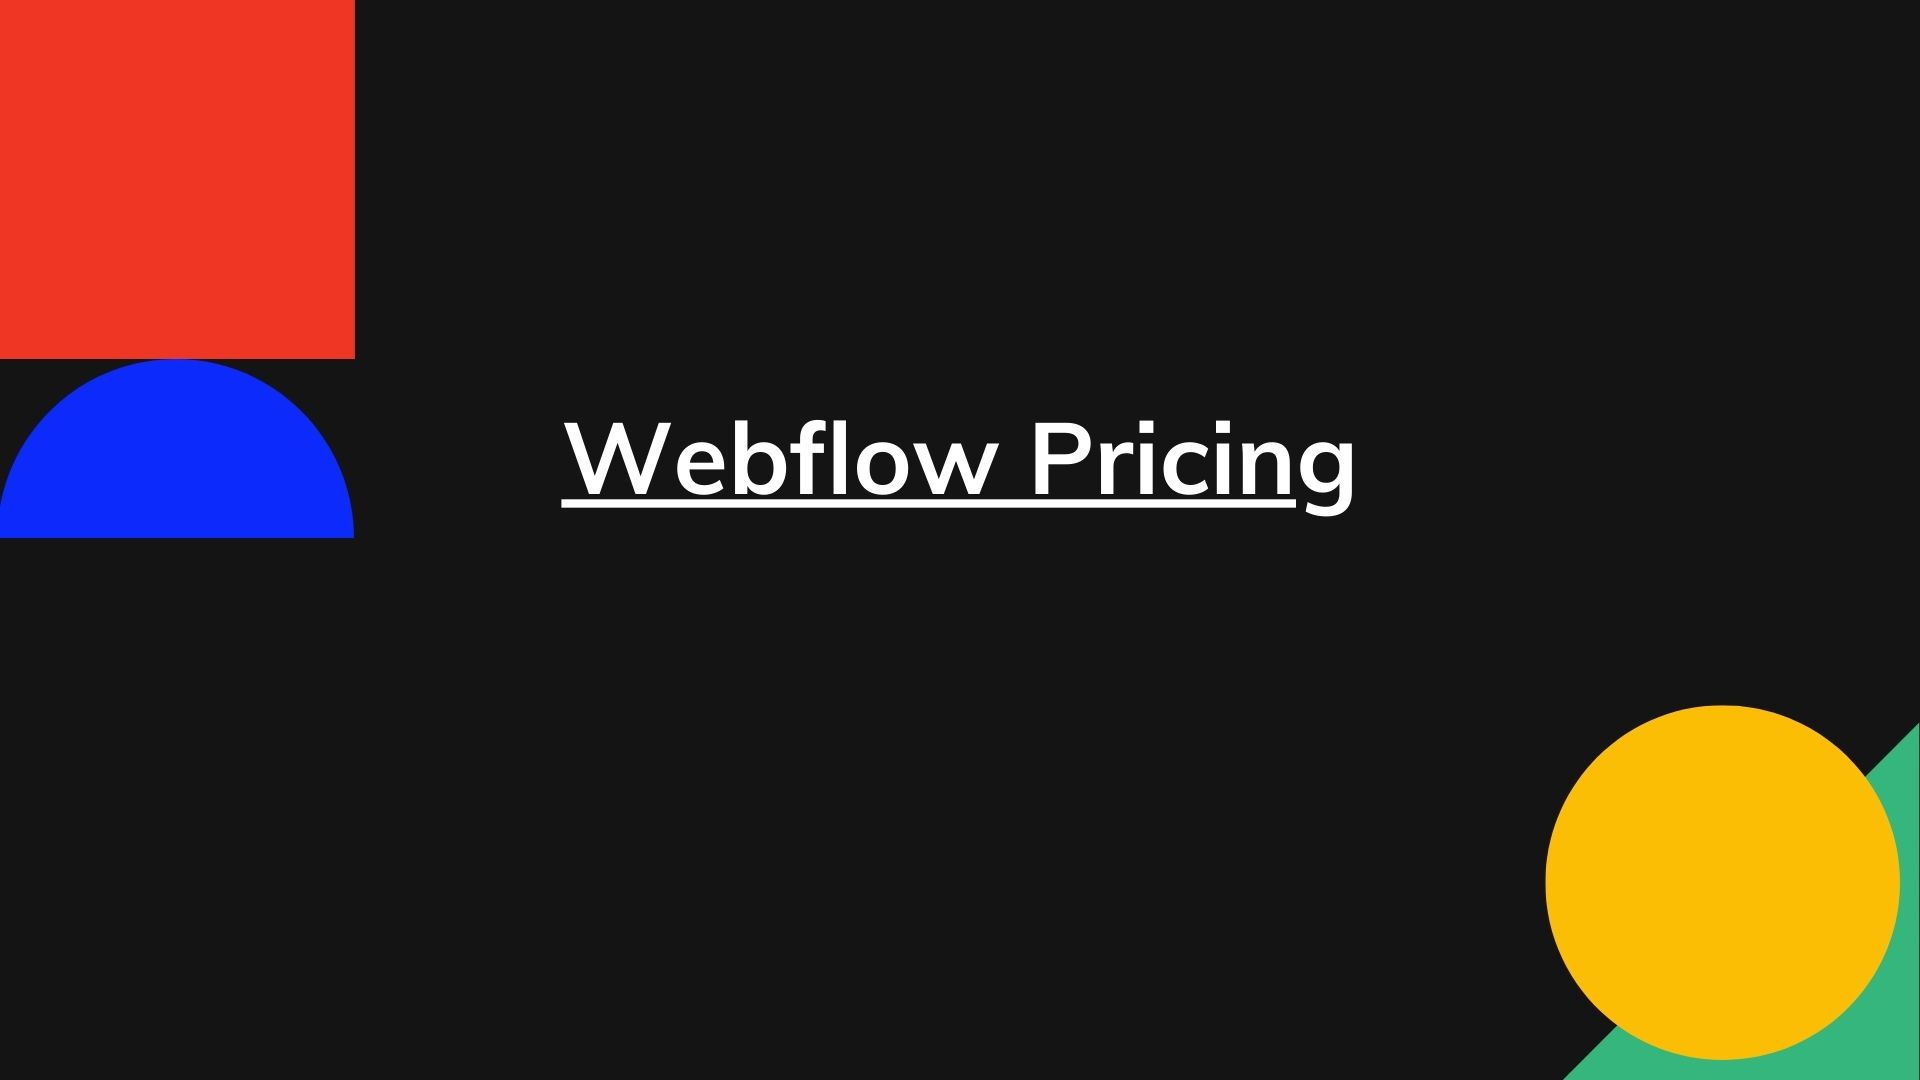 Webflow Pricing – Actual Prices for All Plans Including Enterprise